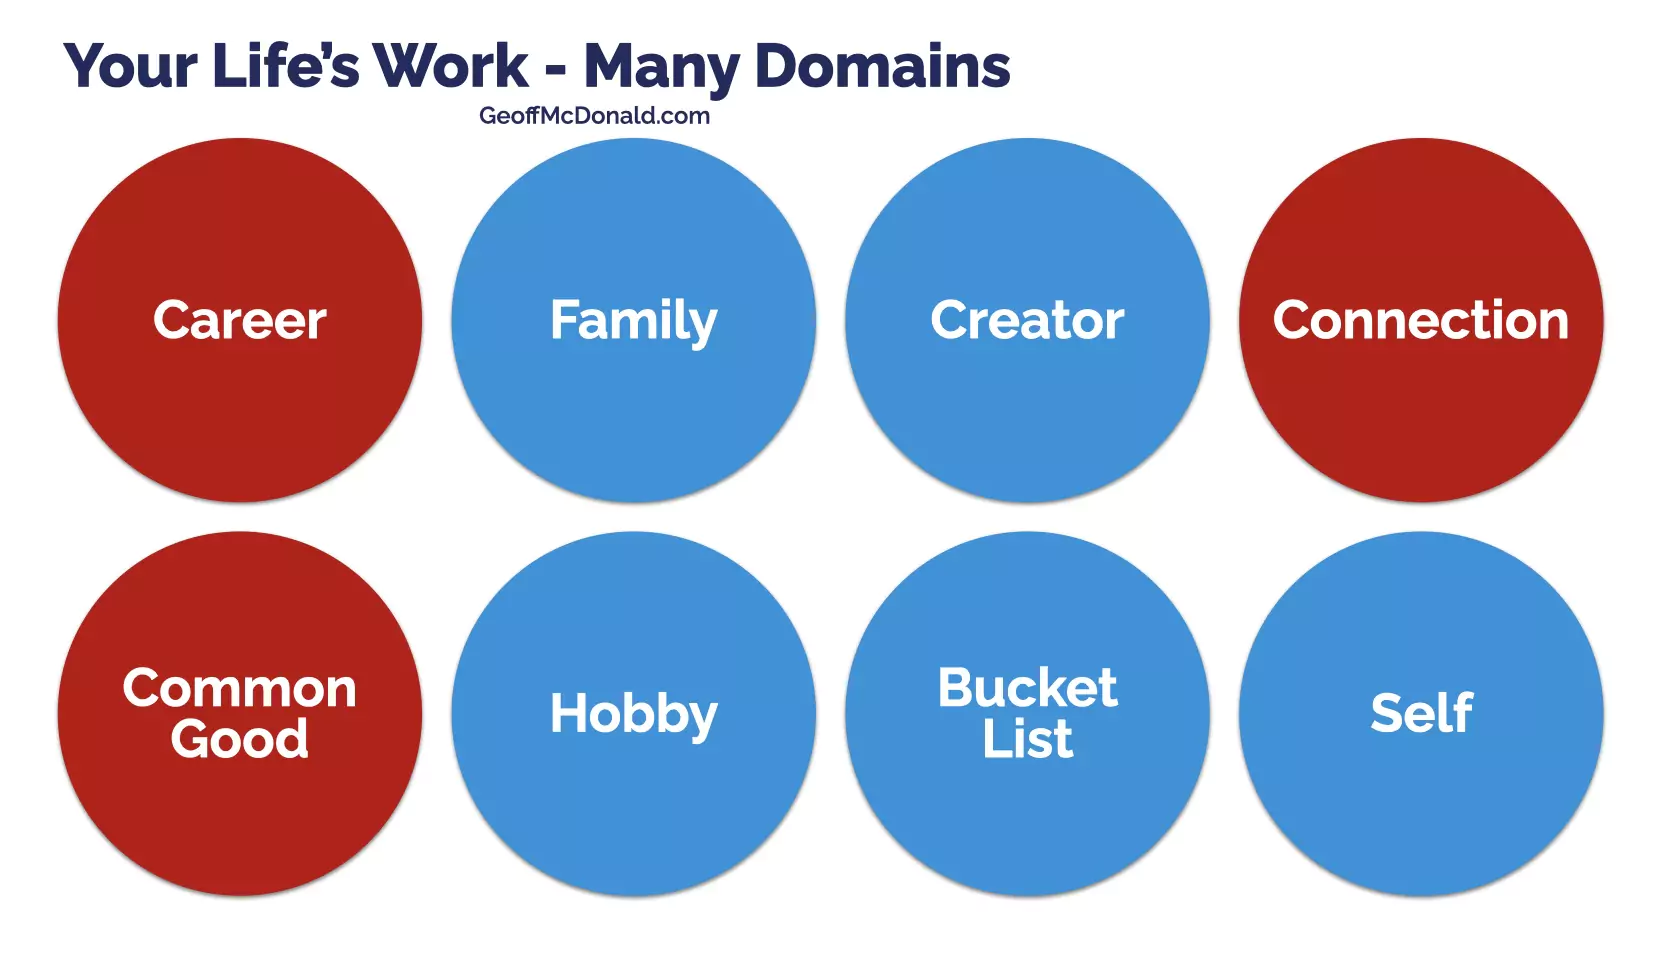 Life's Work - Many Domains